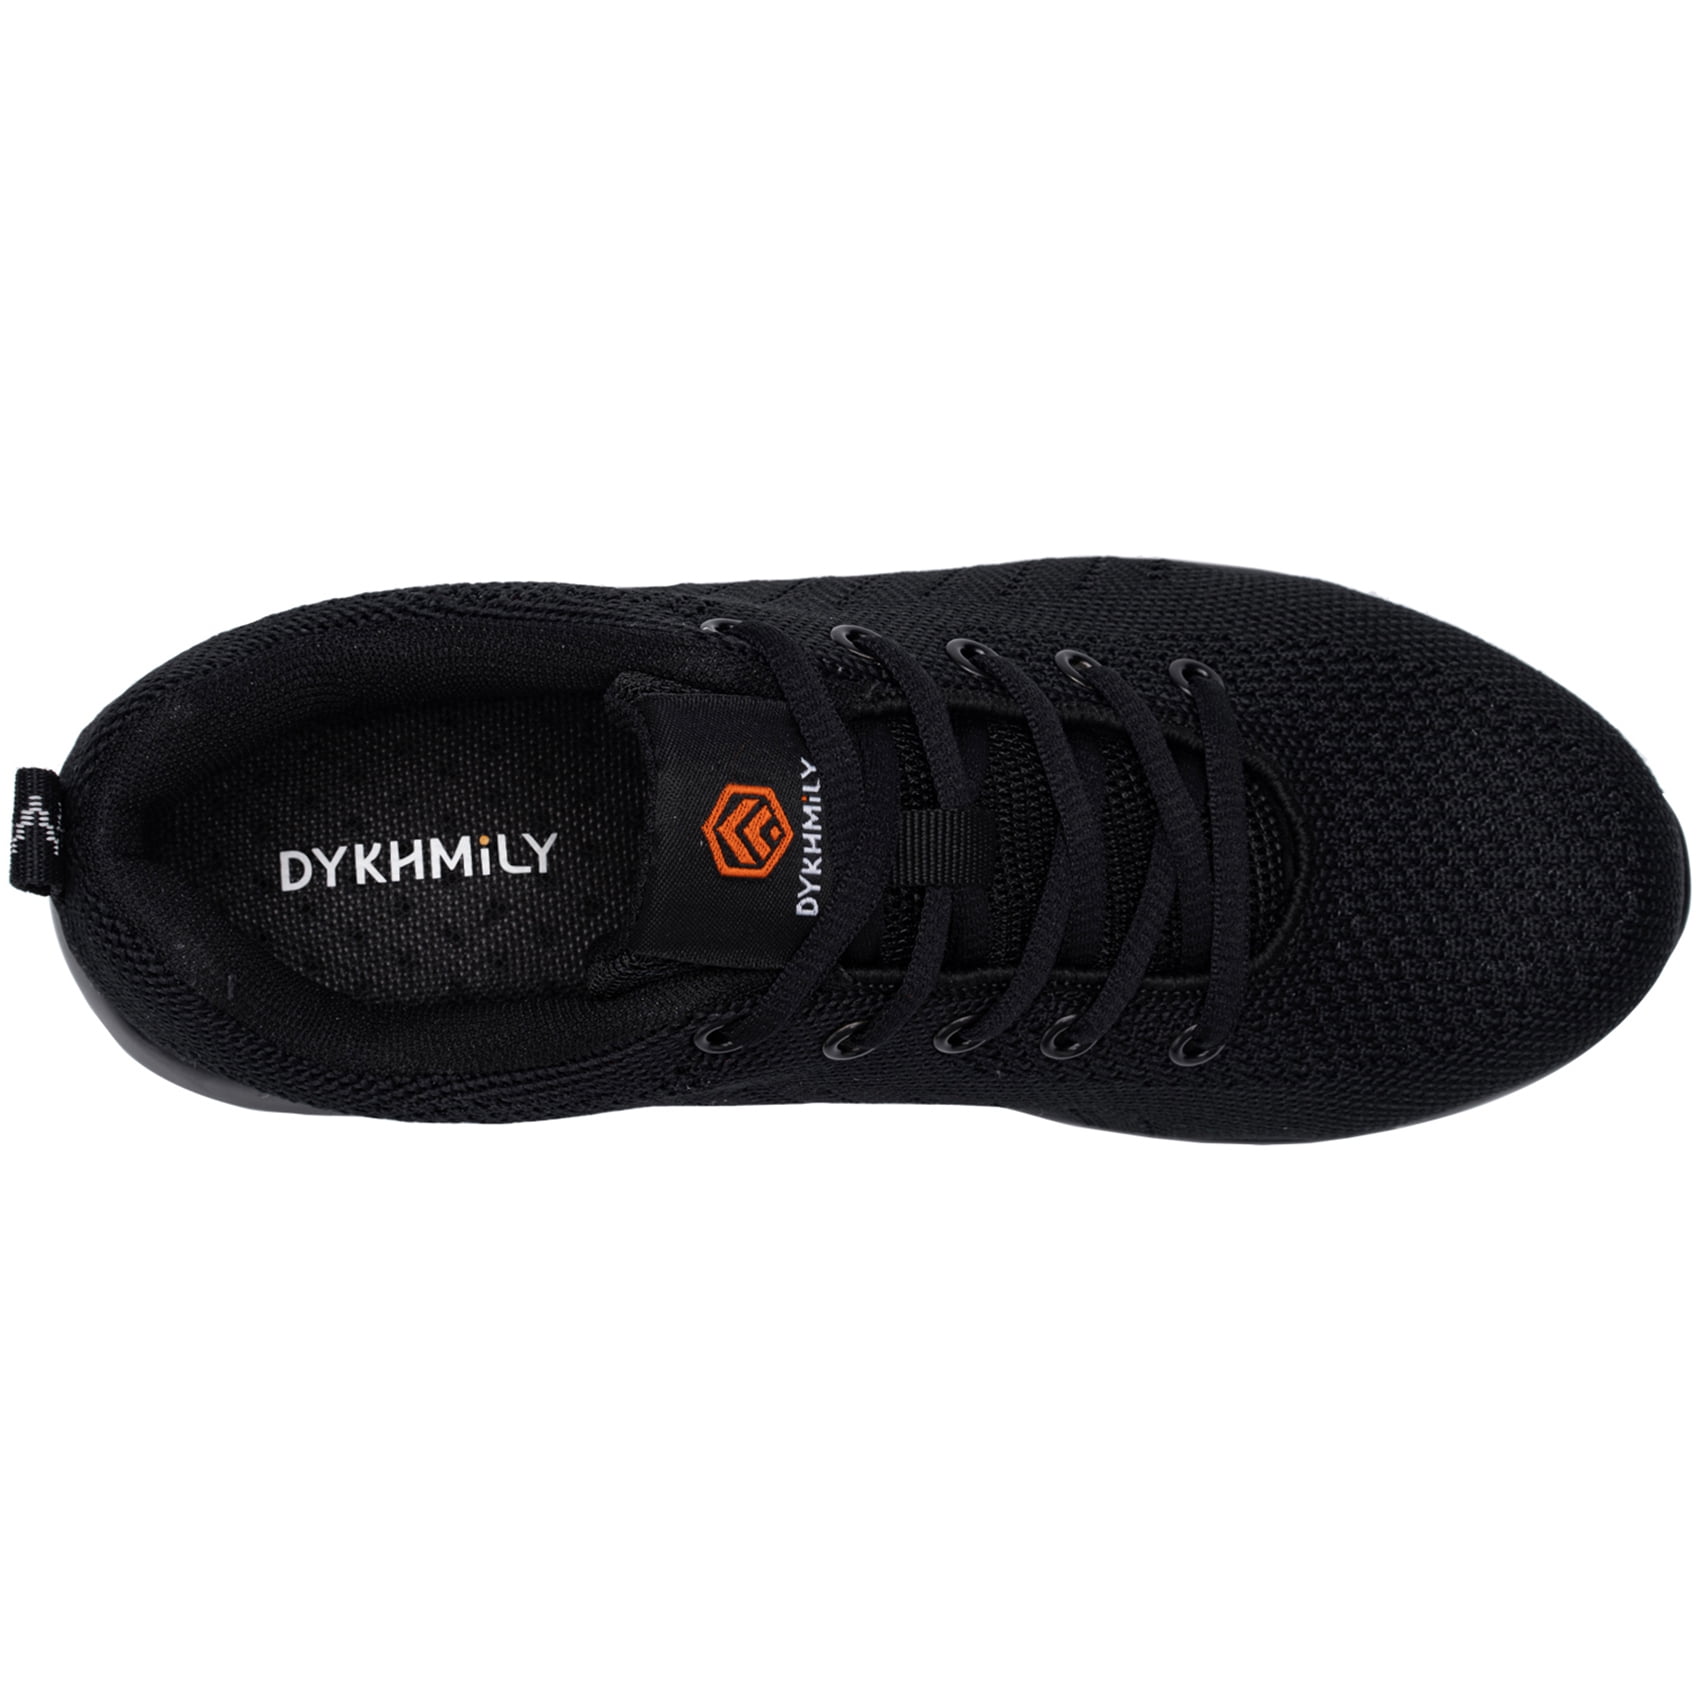 DYKHMILY Steel Toe Sneakers for Women Lightweight Slip on Breathable Work Shoes D868 Cushion Safety Shoes Slip Resistant 